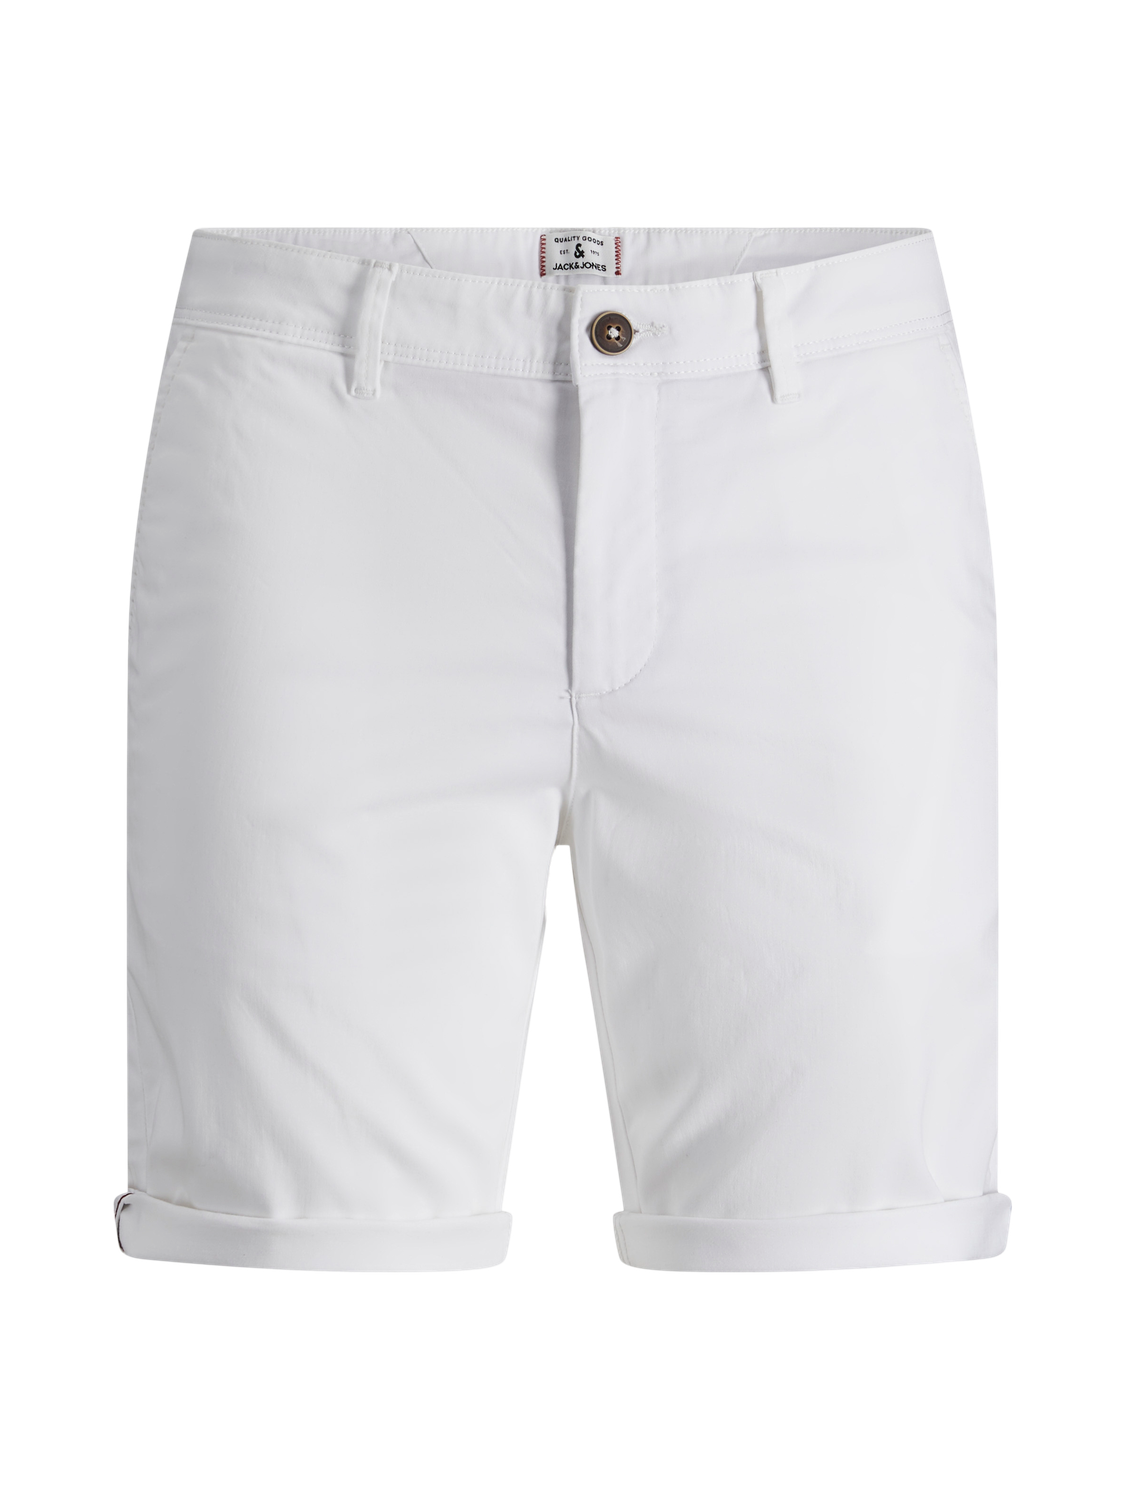 Men's Bowie Shorts Solid-White-Front View